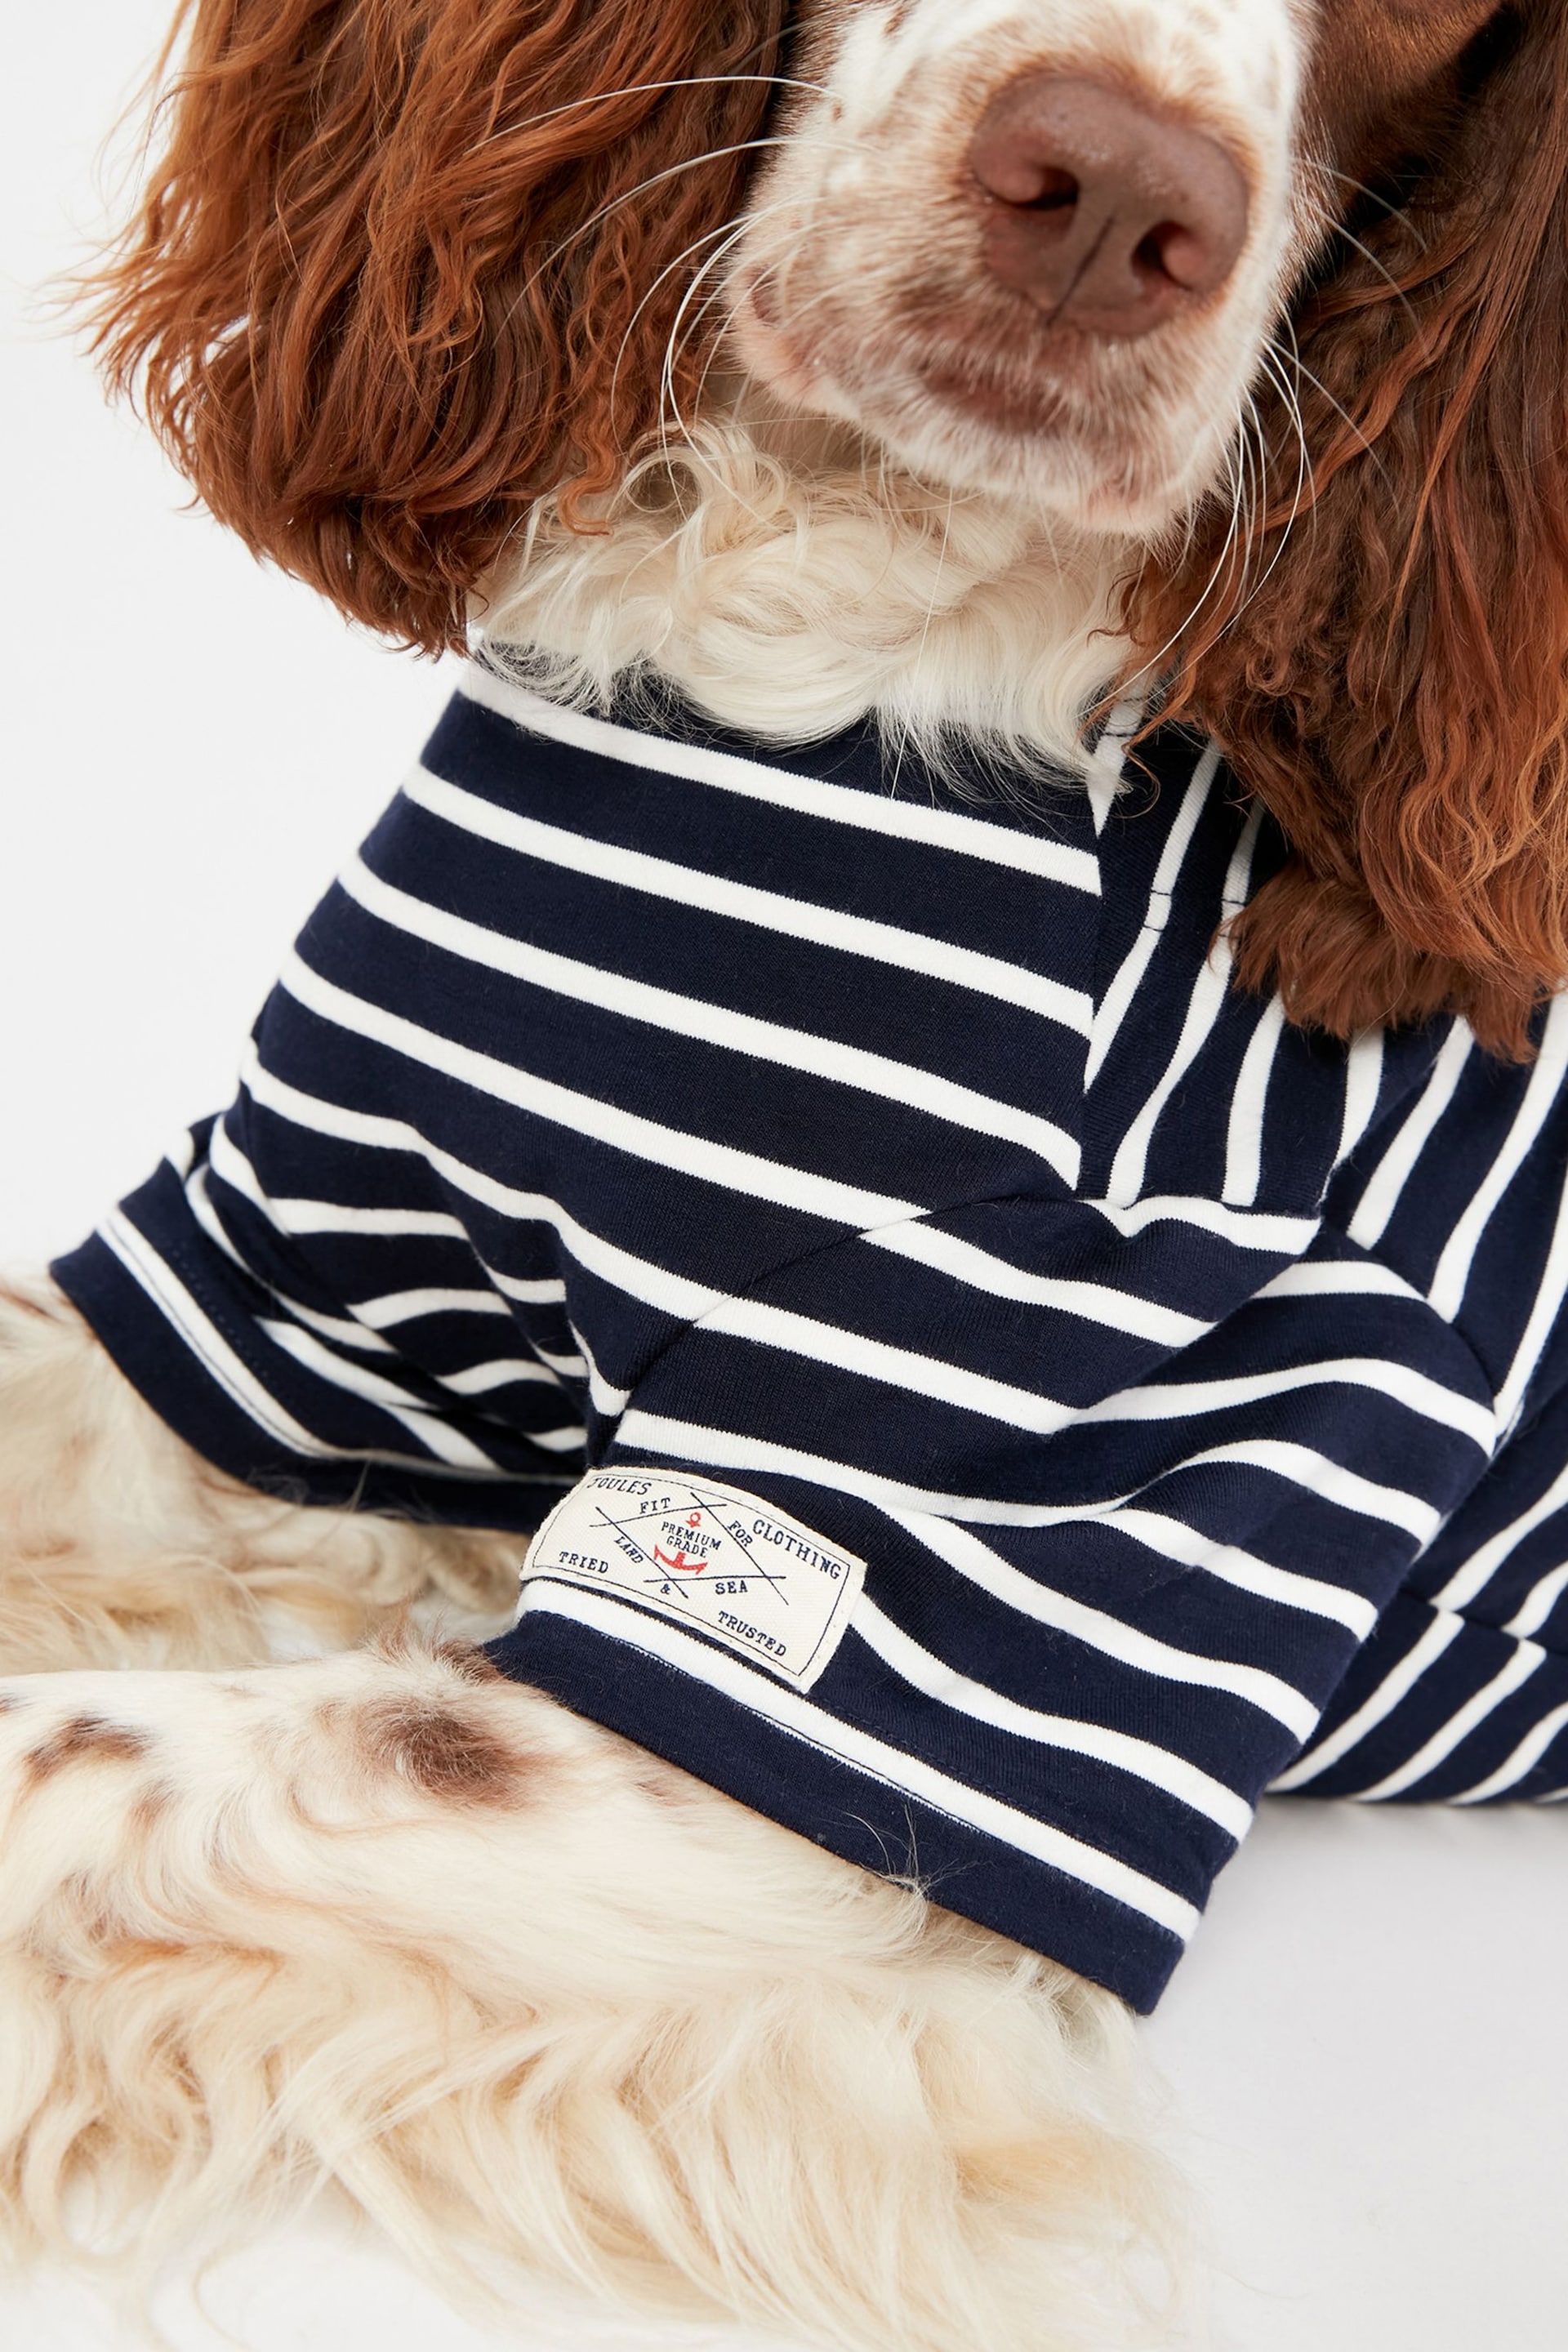 Joules Blue Harbour Dog Top - Image 2 of 2